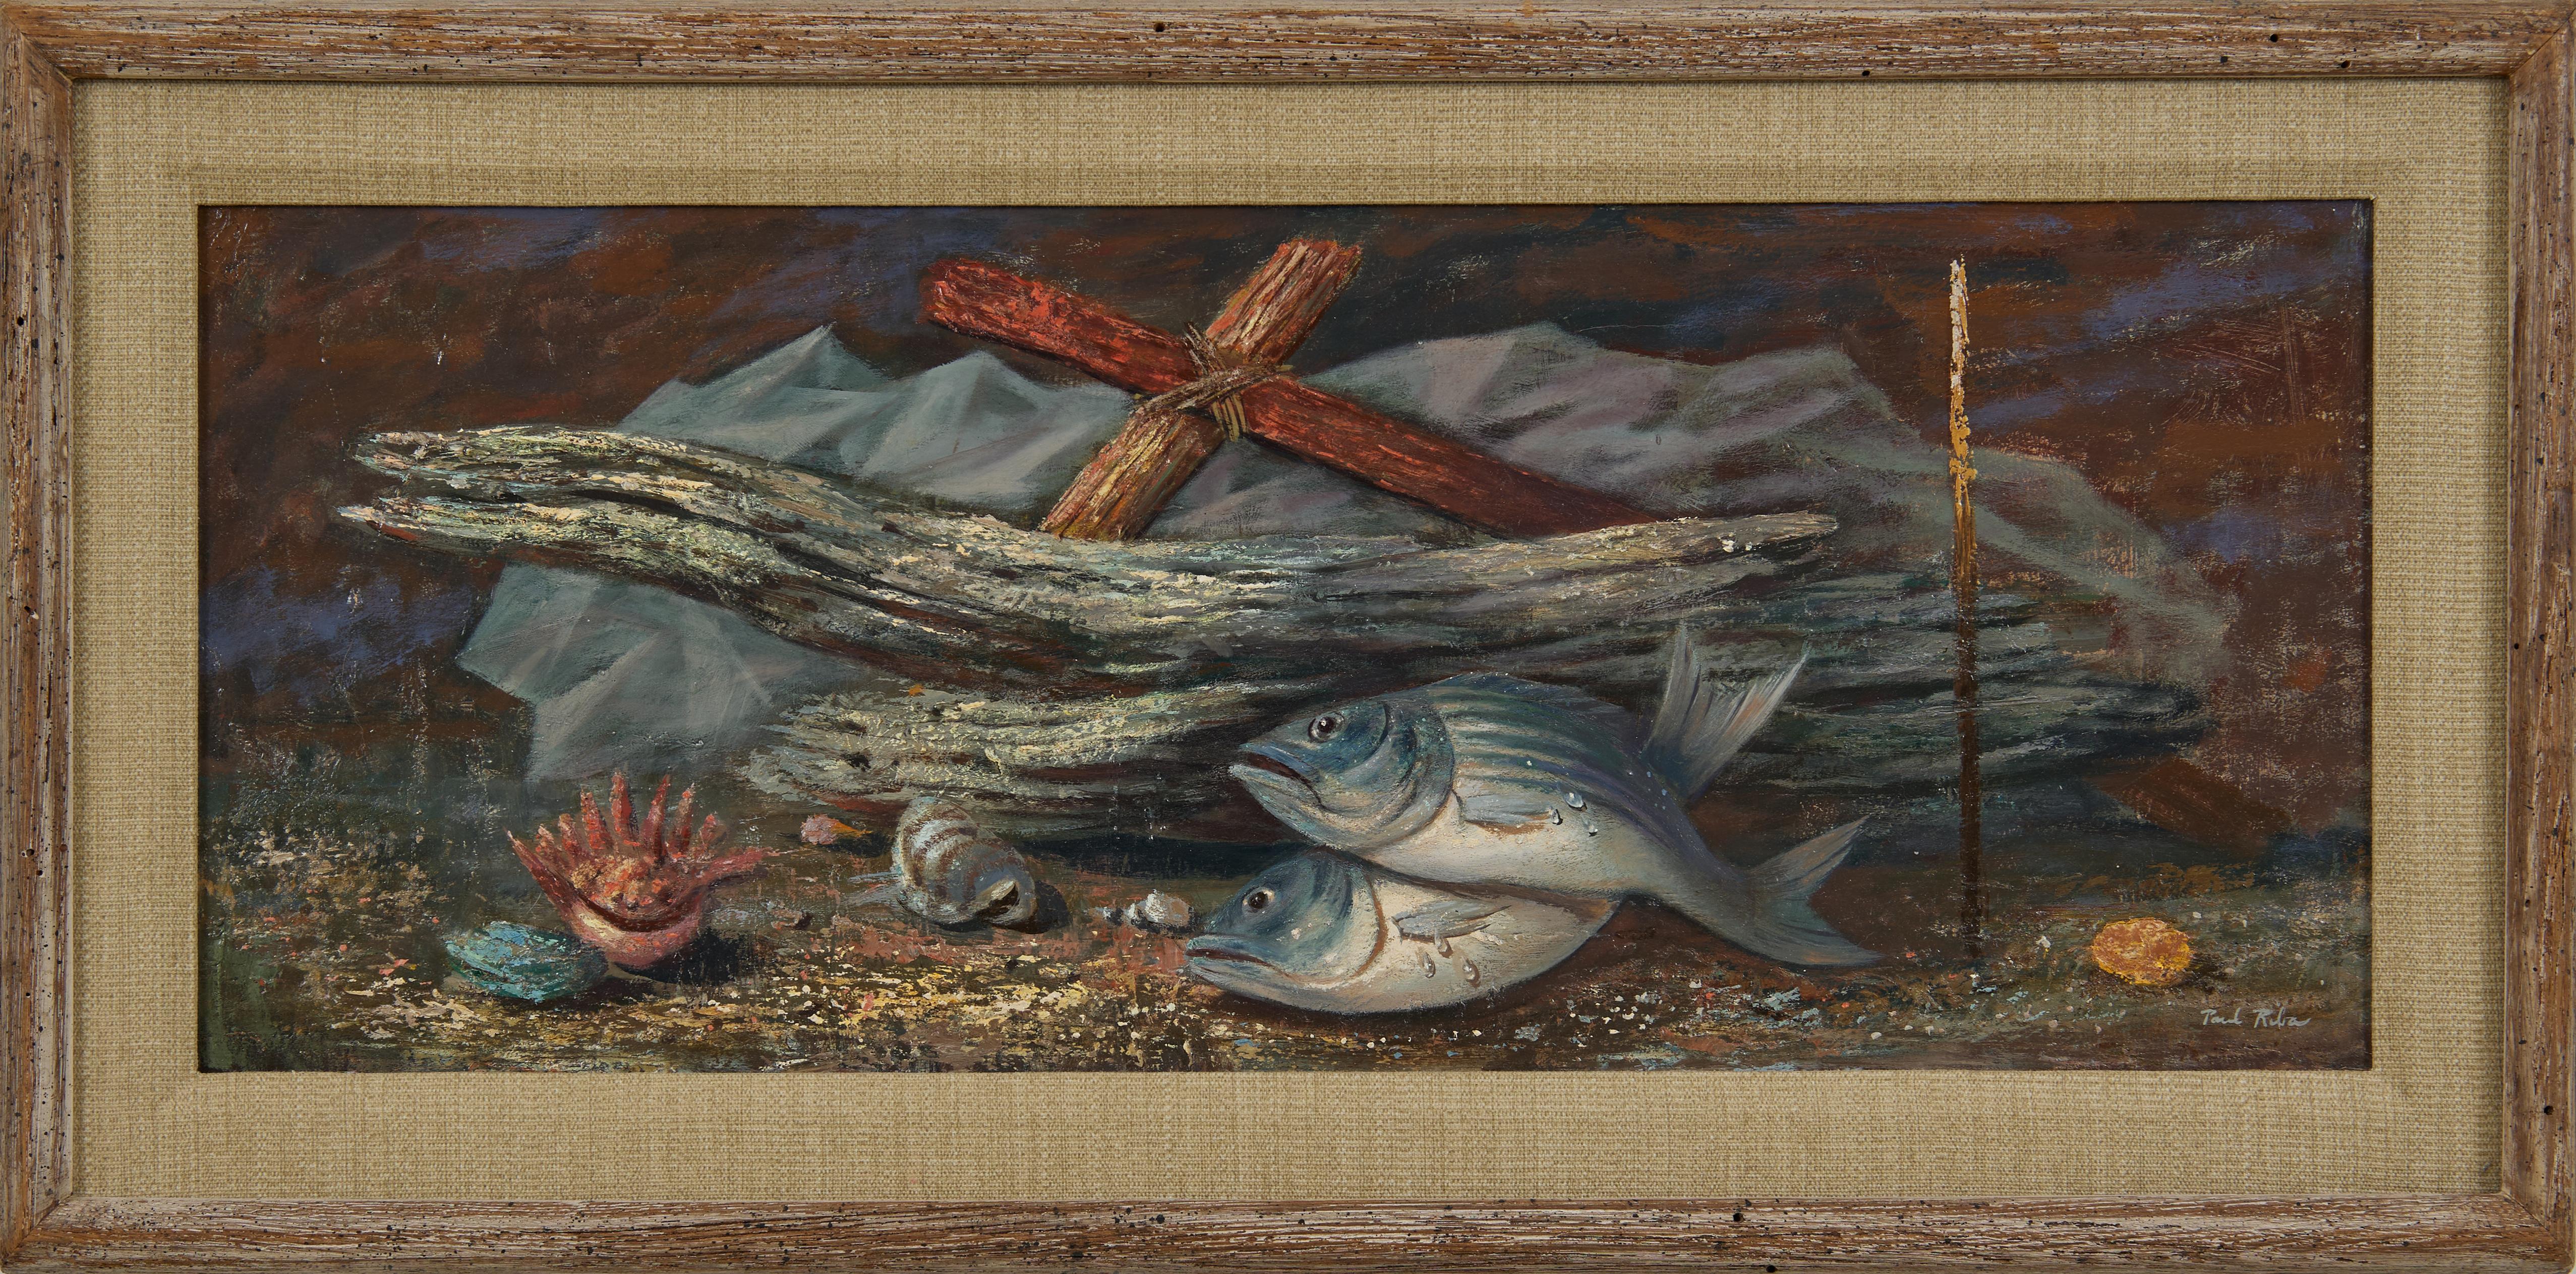 Driftwood & Fish, Mid-20th Century Magical Realism, Surrealist Cleveland Artist - Painting by Paul Riba